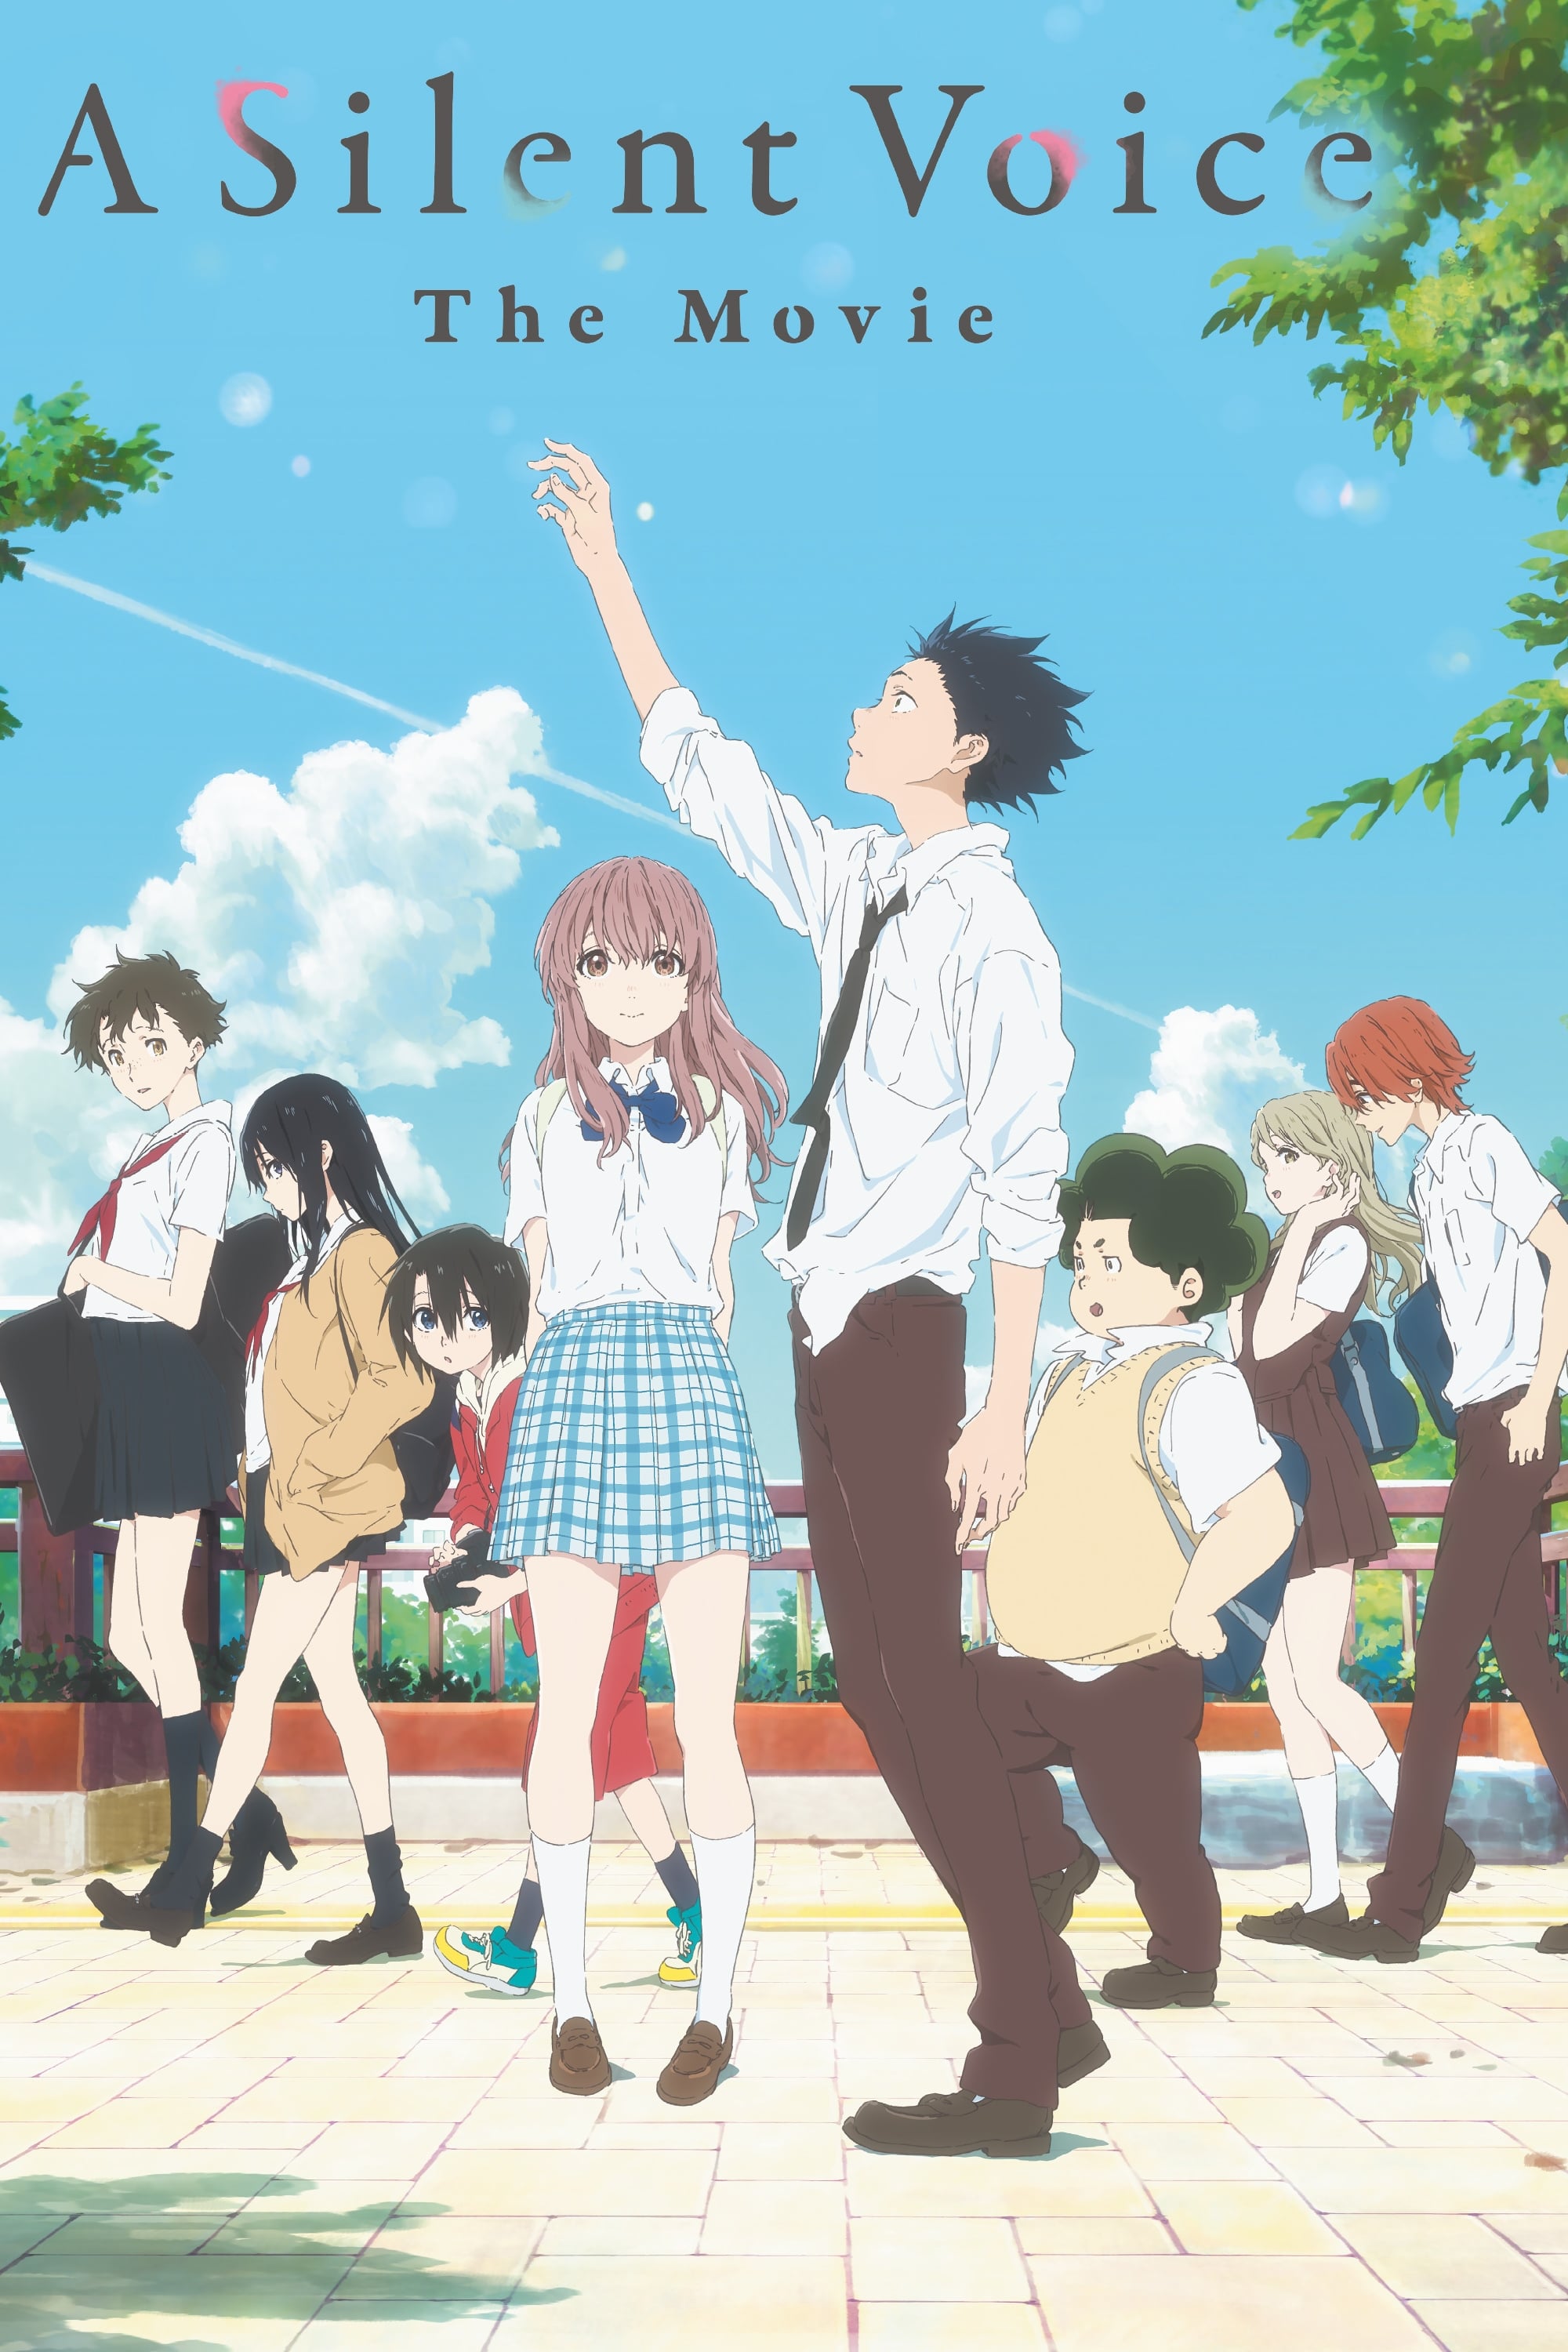 A Silent Voice Movie Poster